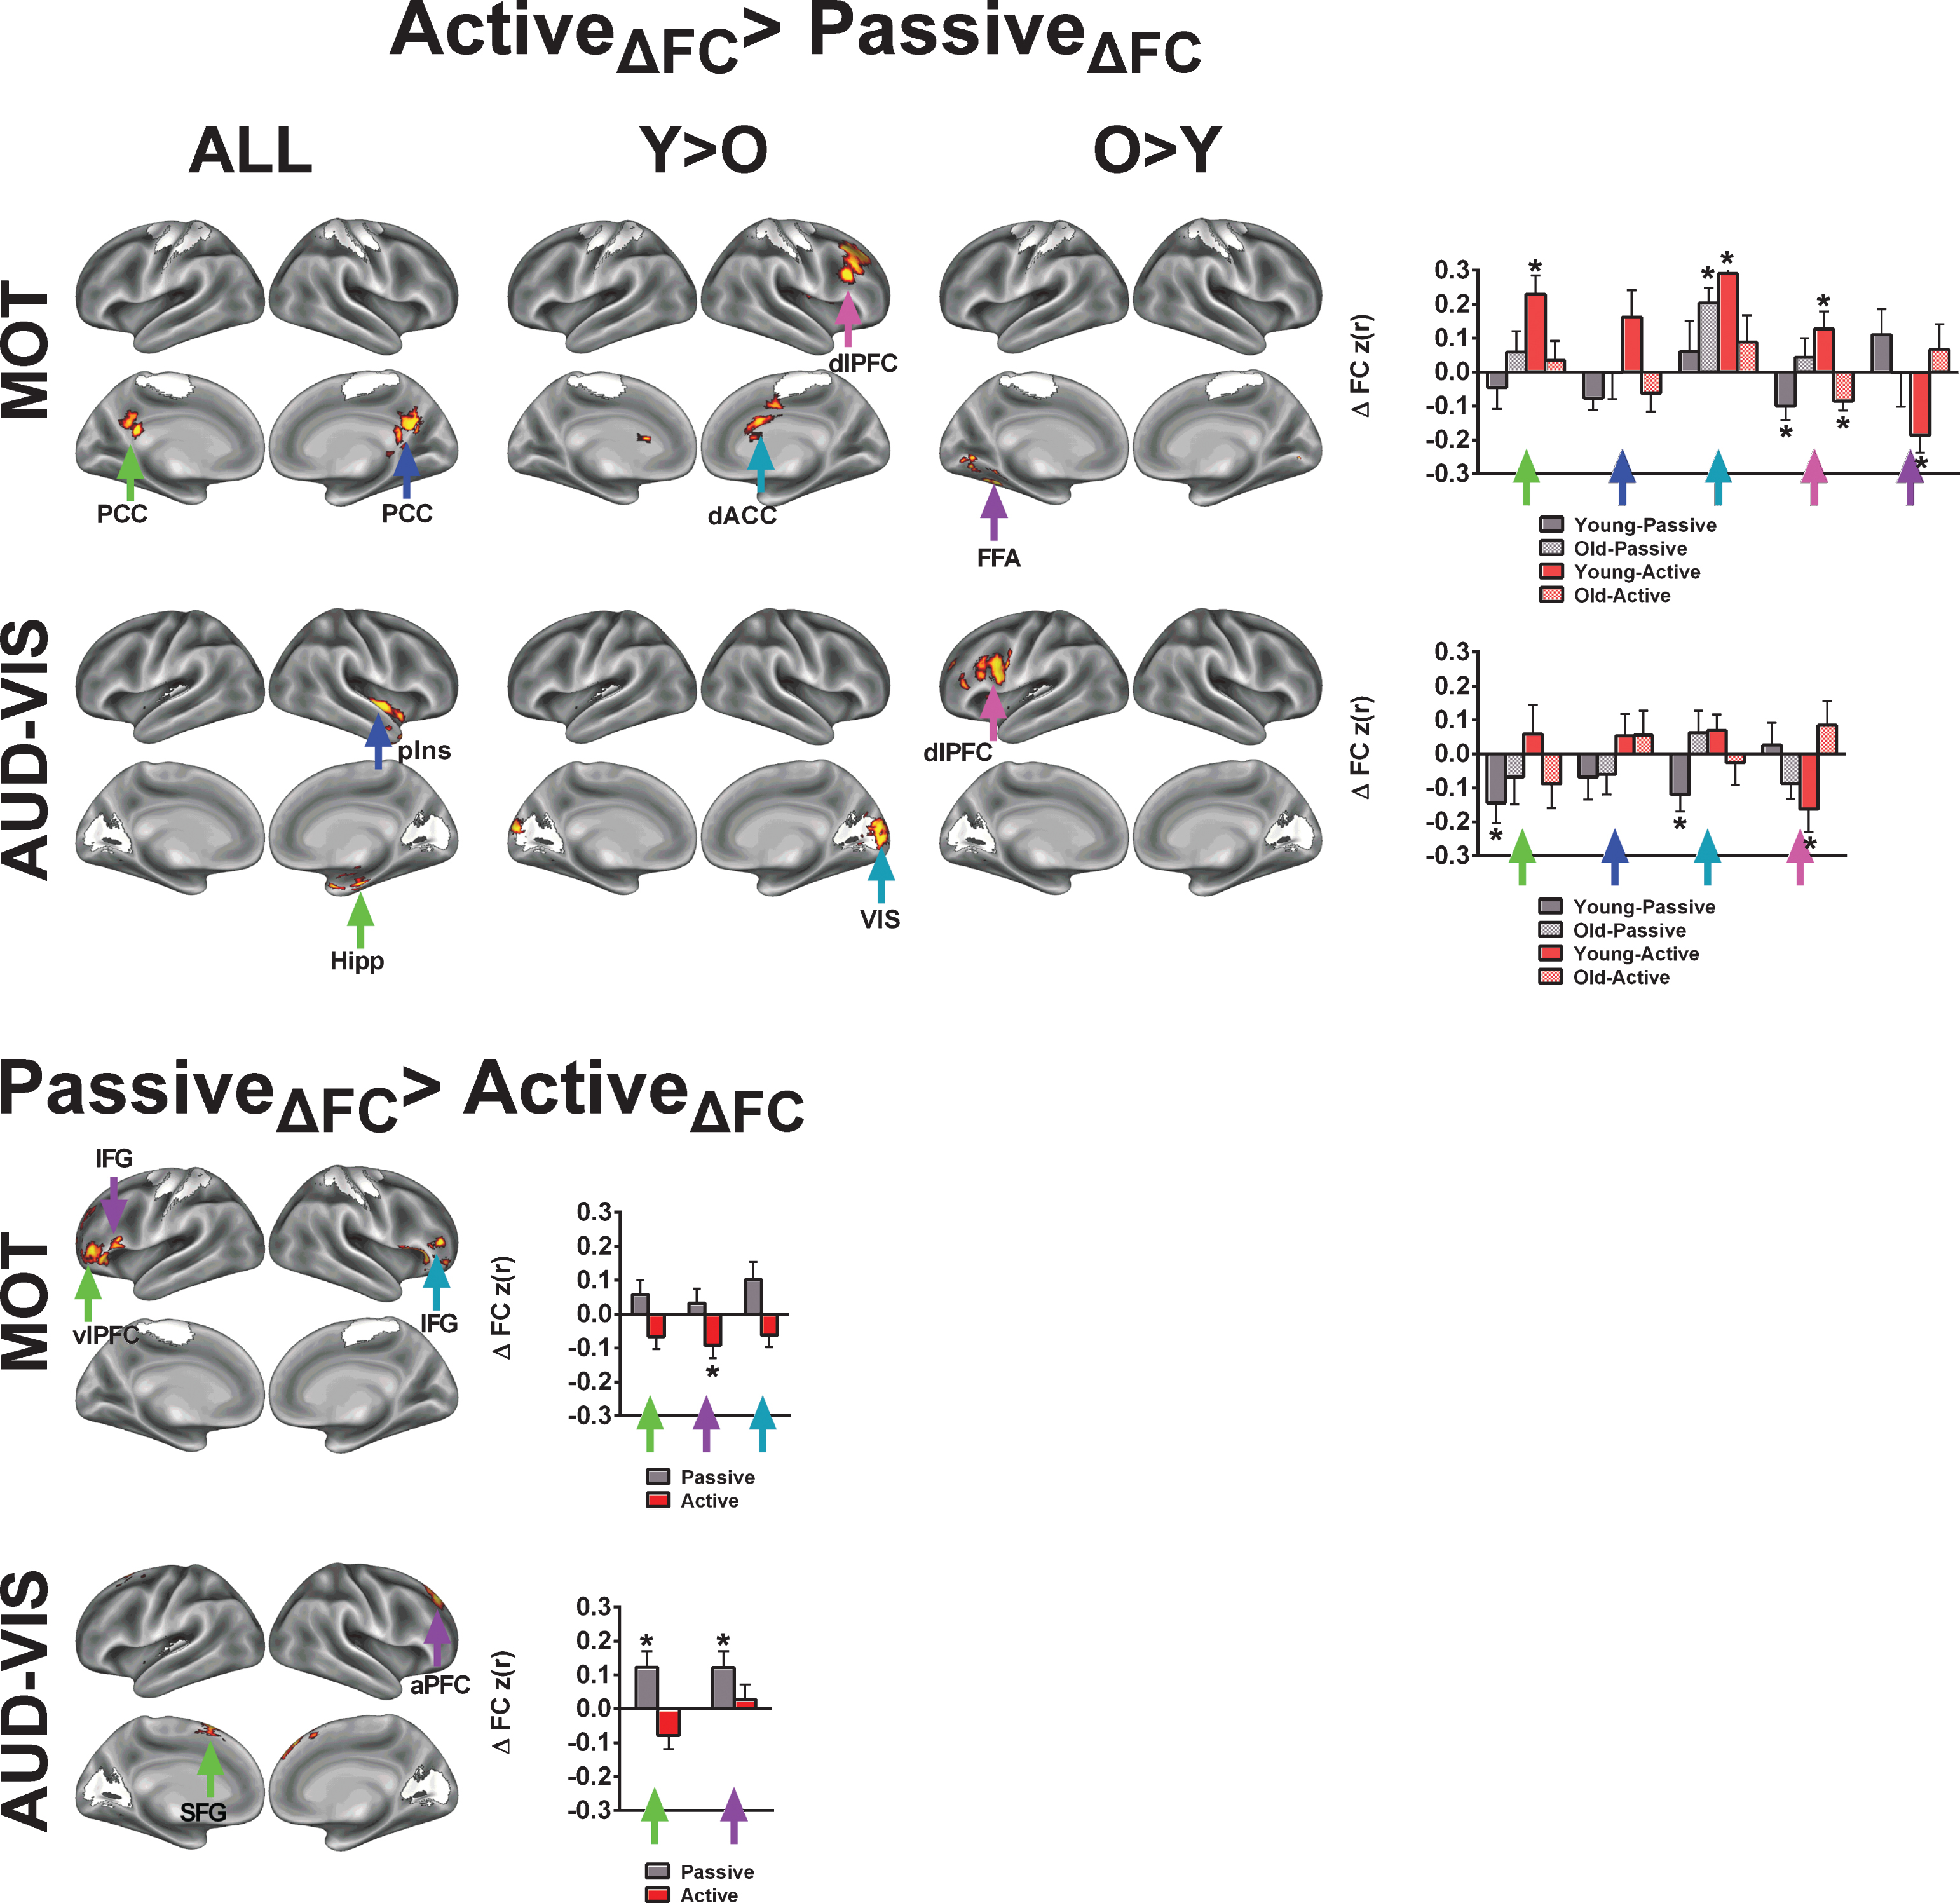 Control analysis for demonstrating the specificity of acute exercise effects toward higher-level cognitive networks. In this control analysis, we examined acute exercise effects on two networks related to sensory and motorprocesses. The colored arrows in the bar graphs correspond to the arrows in the brain surface. The asterisks (*) in indicate regions exhibited a significant change from the pre-exercise FC for each condition based on a two-tailed, one-sample t-test, p < 0.05, uncorrected. Refer to Tables 4 and 5 for anatomical descriptions of significant clusters, MNI coordinates, and statistical scores. Network templates are shown for reference, and the colors correspond to Fig. 3. All results are significant at Z > 1.96 and p < 0.05, corrected for multiple comparisons.